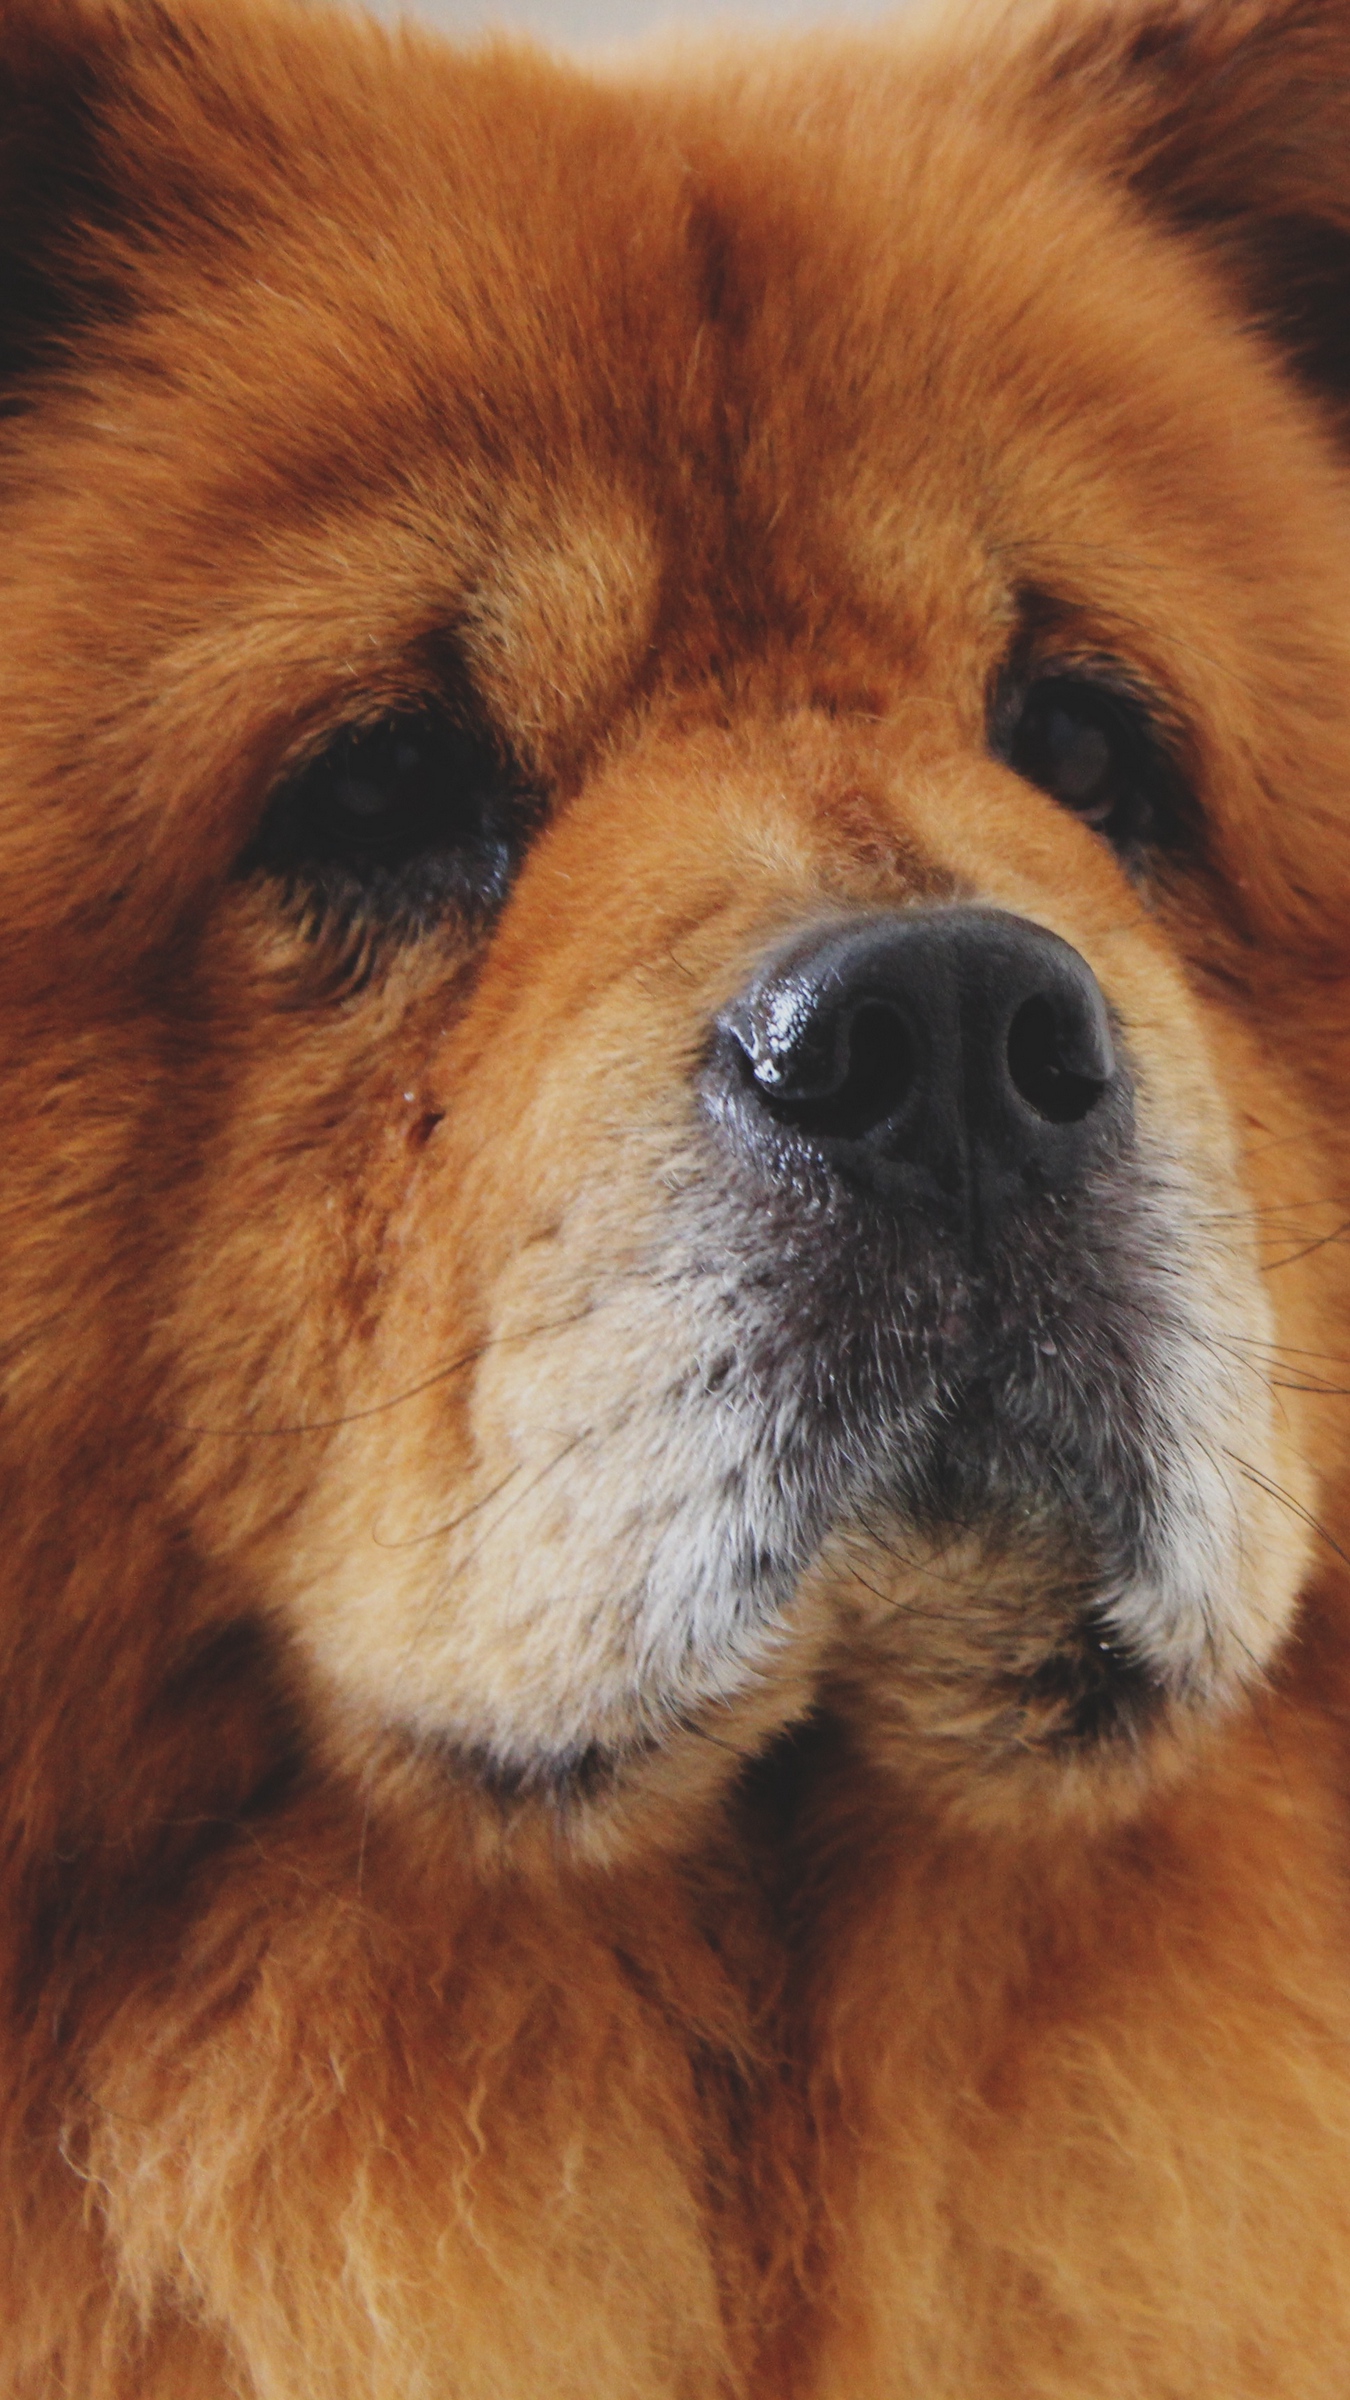 Download wallpaper 1350x2400 chow chow, dog, muzzle iphone 8+/7+/6s+